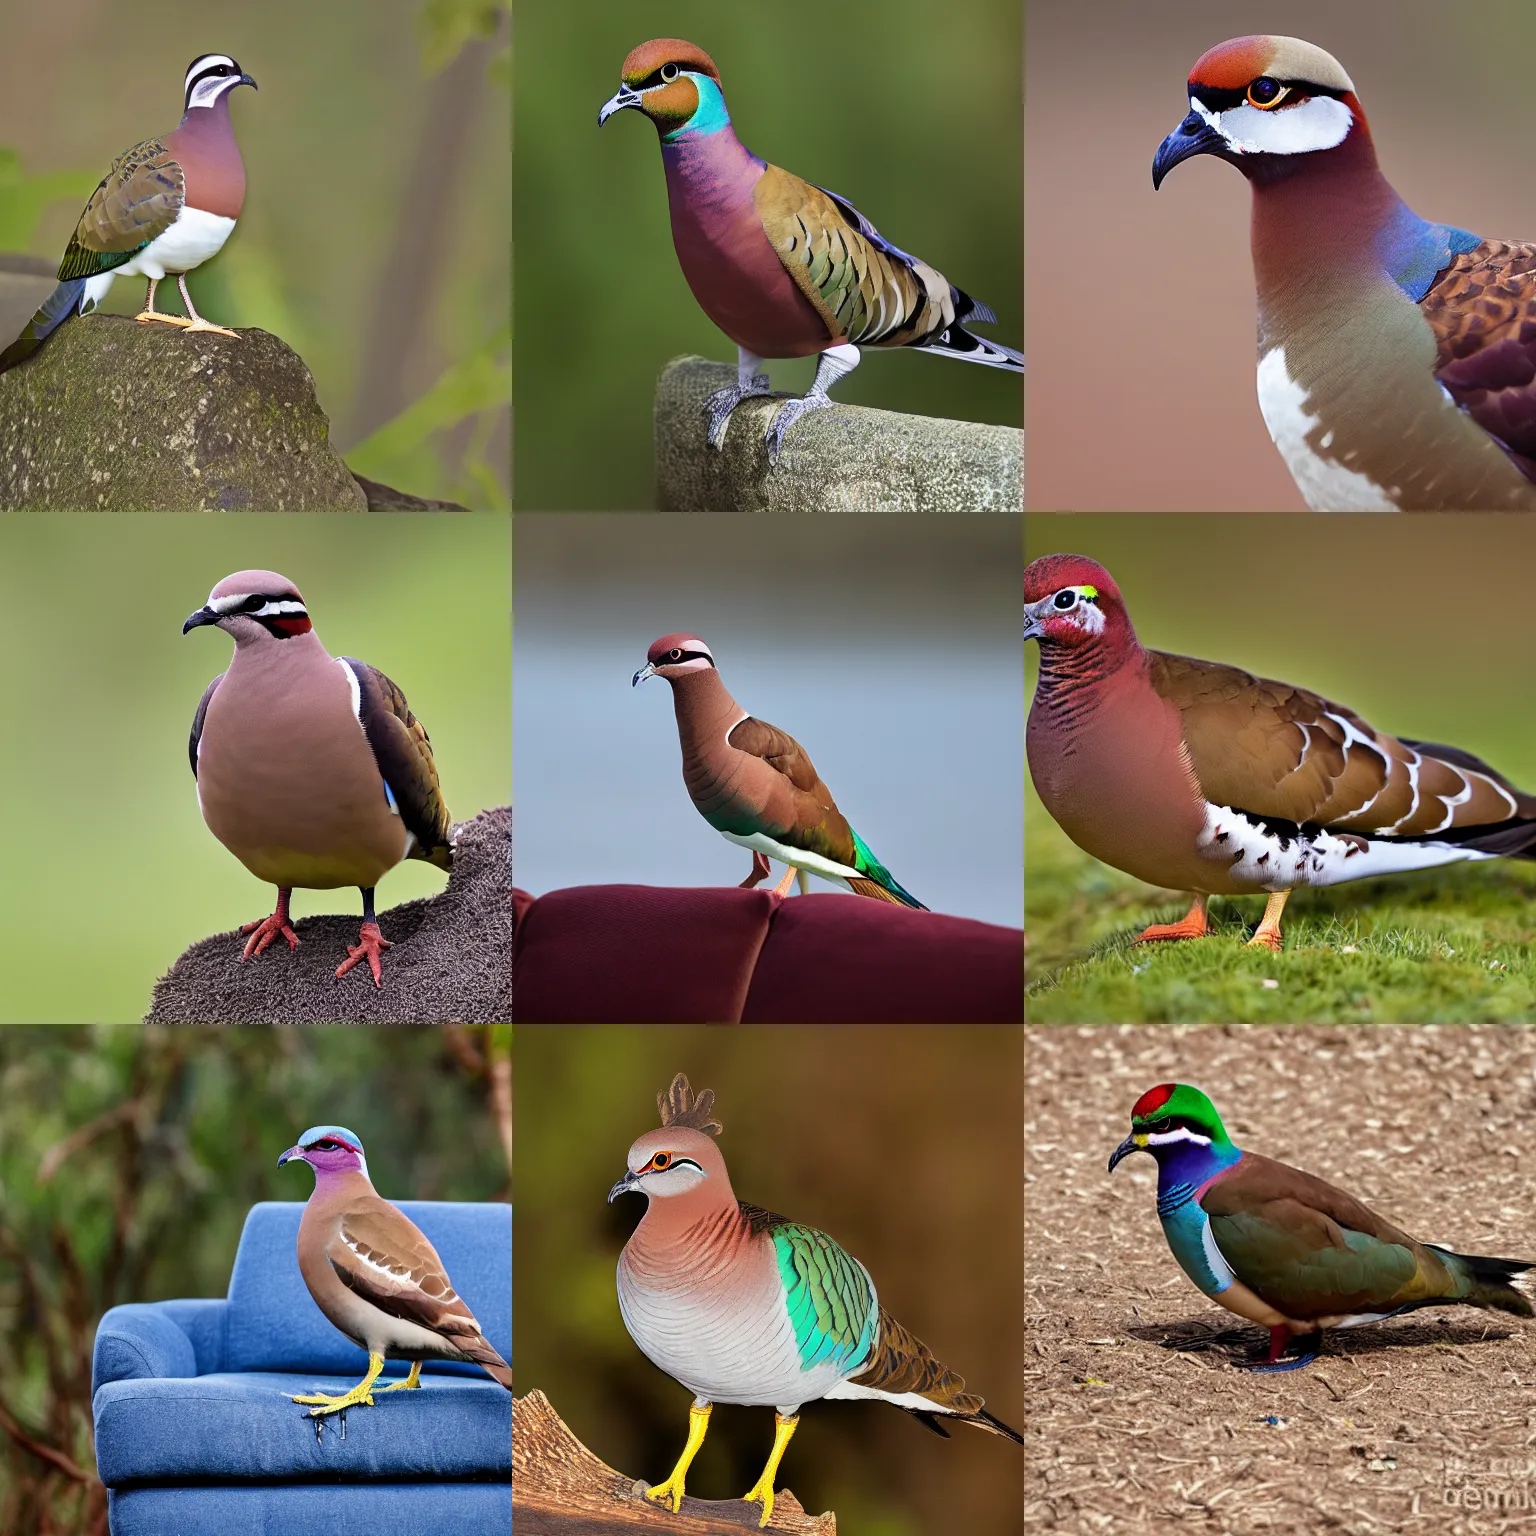 Prompt: common bronzewing bird, sitting on a couch, wildlife photography